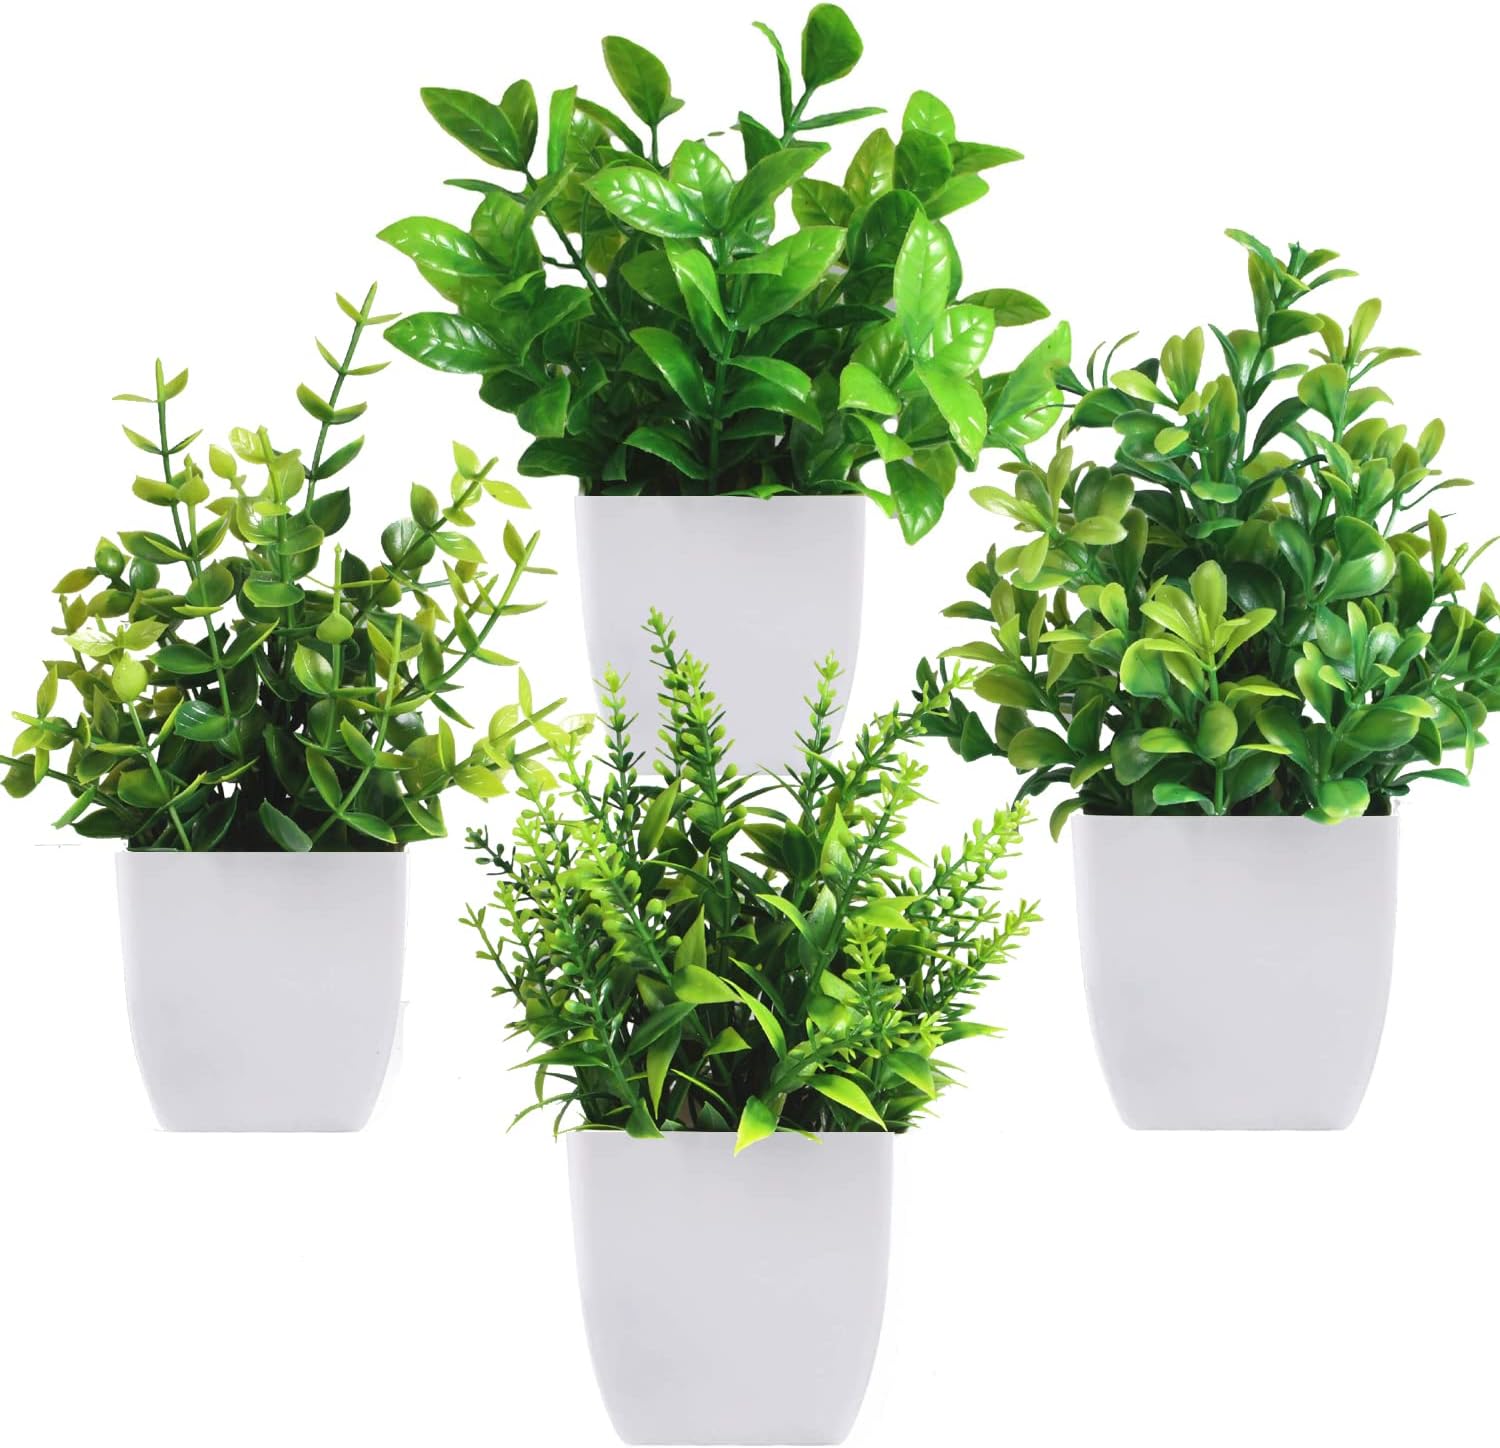 4 Pack Mini Fake Plants Small Potted Artificial Plants Plastic Plants for Home Bathroom Office Table Decoration